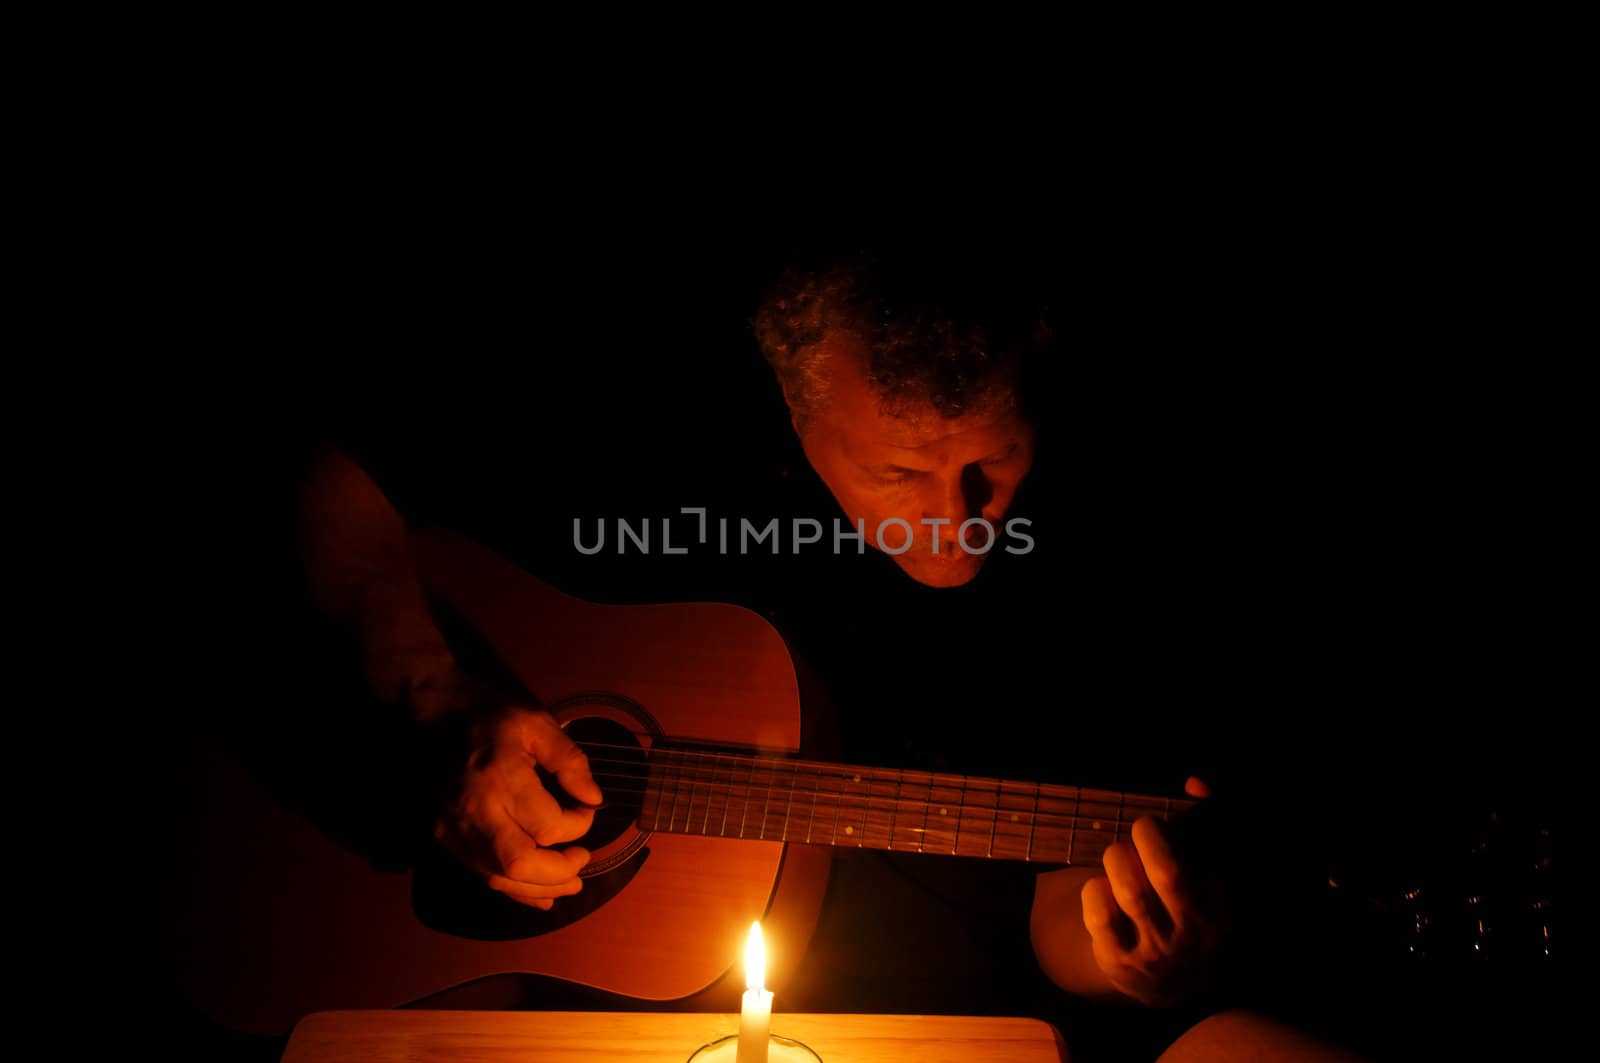 A man playing his guitar at nightime with just the light of a single candle.